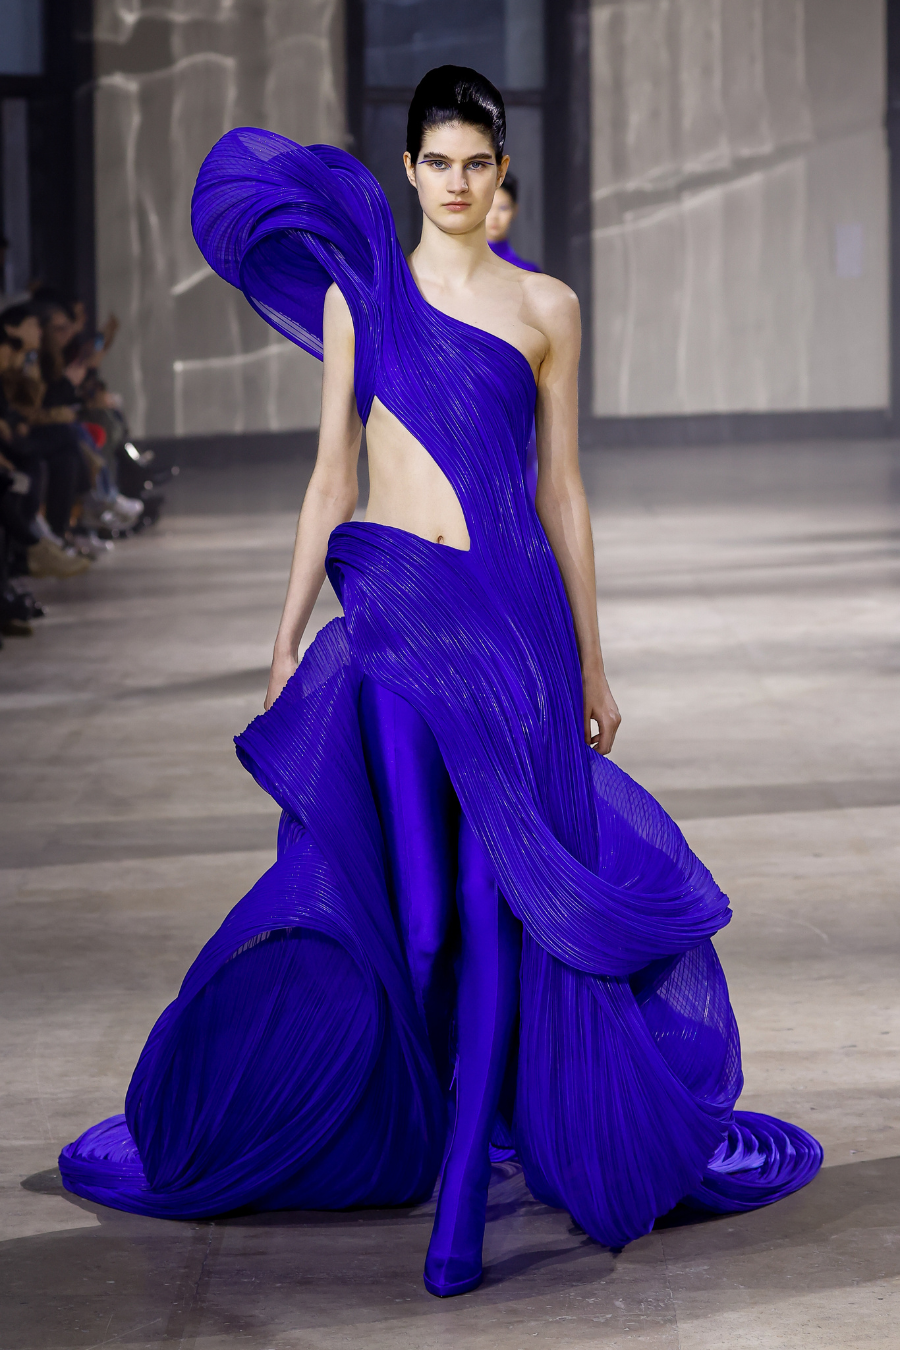 THE BEST OF SPRING/SUMMER 2023 HAUTE COUTURE - PASHION Magazine